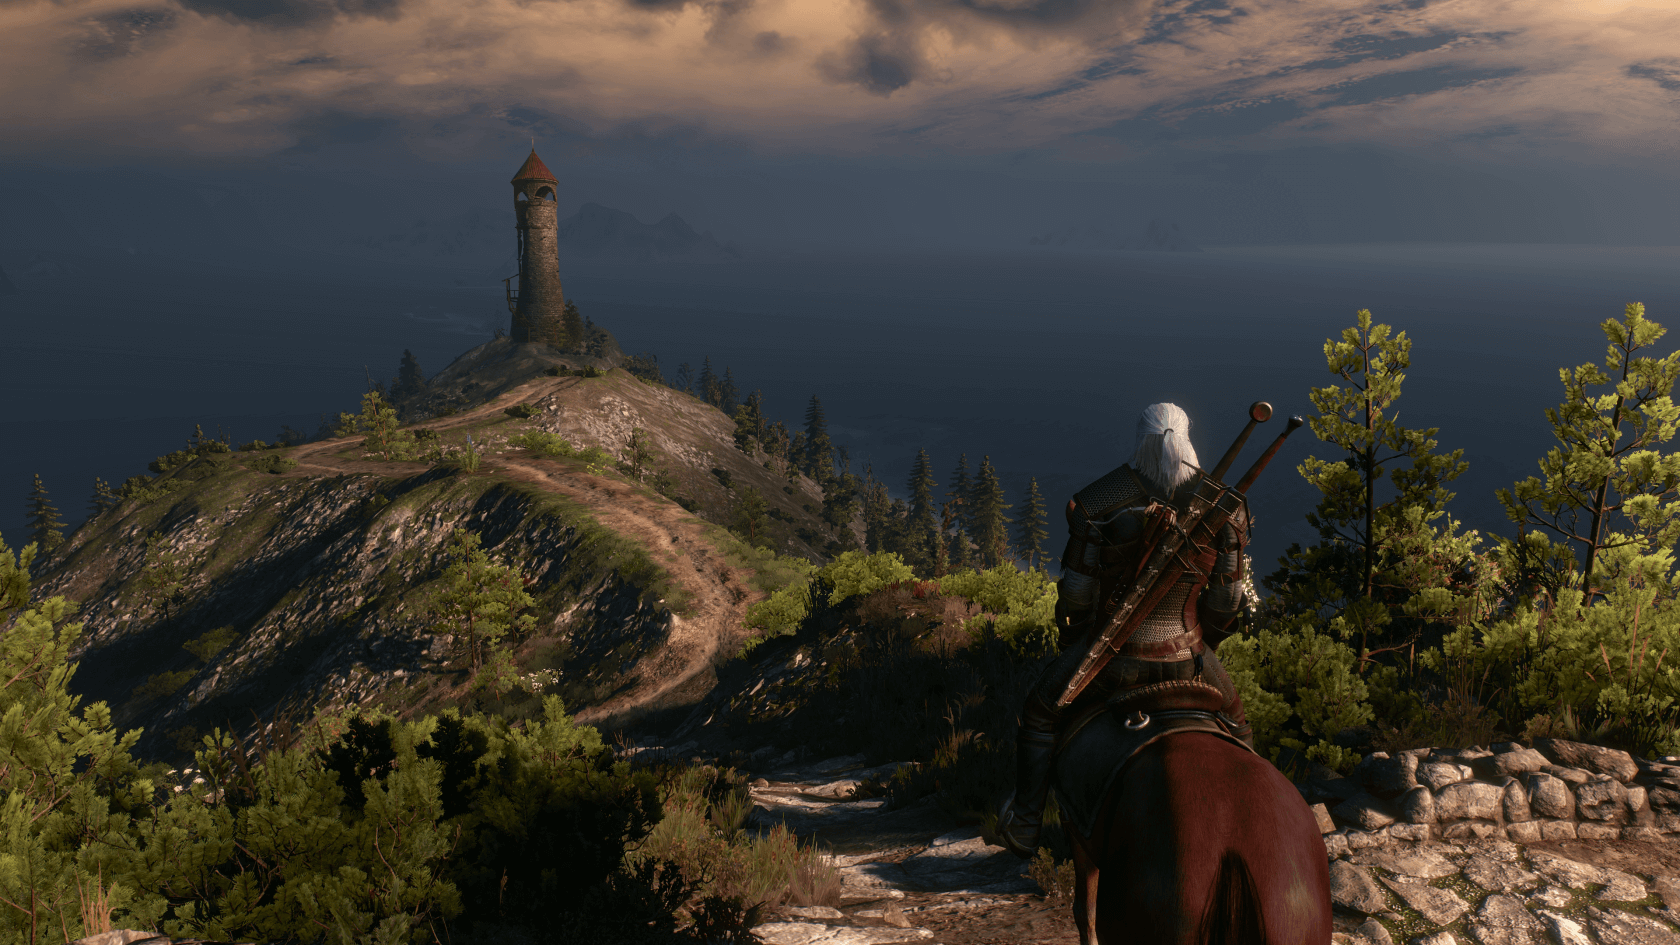 More than 20 million copies of The Witcher 3 have been sold to date